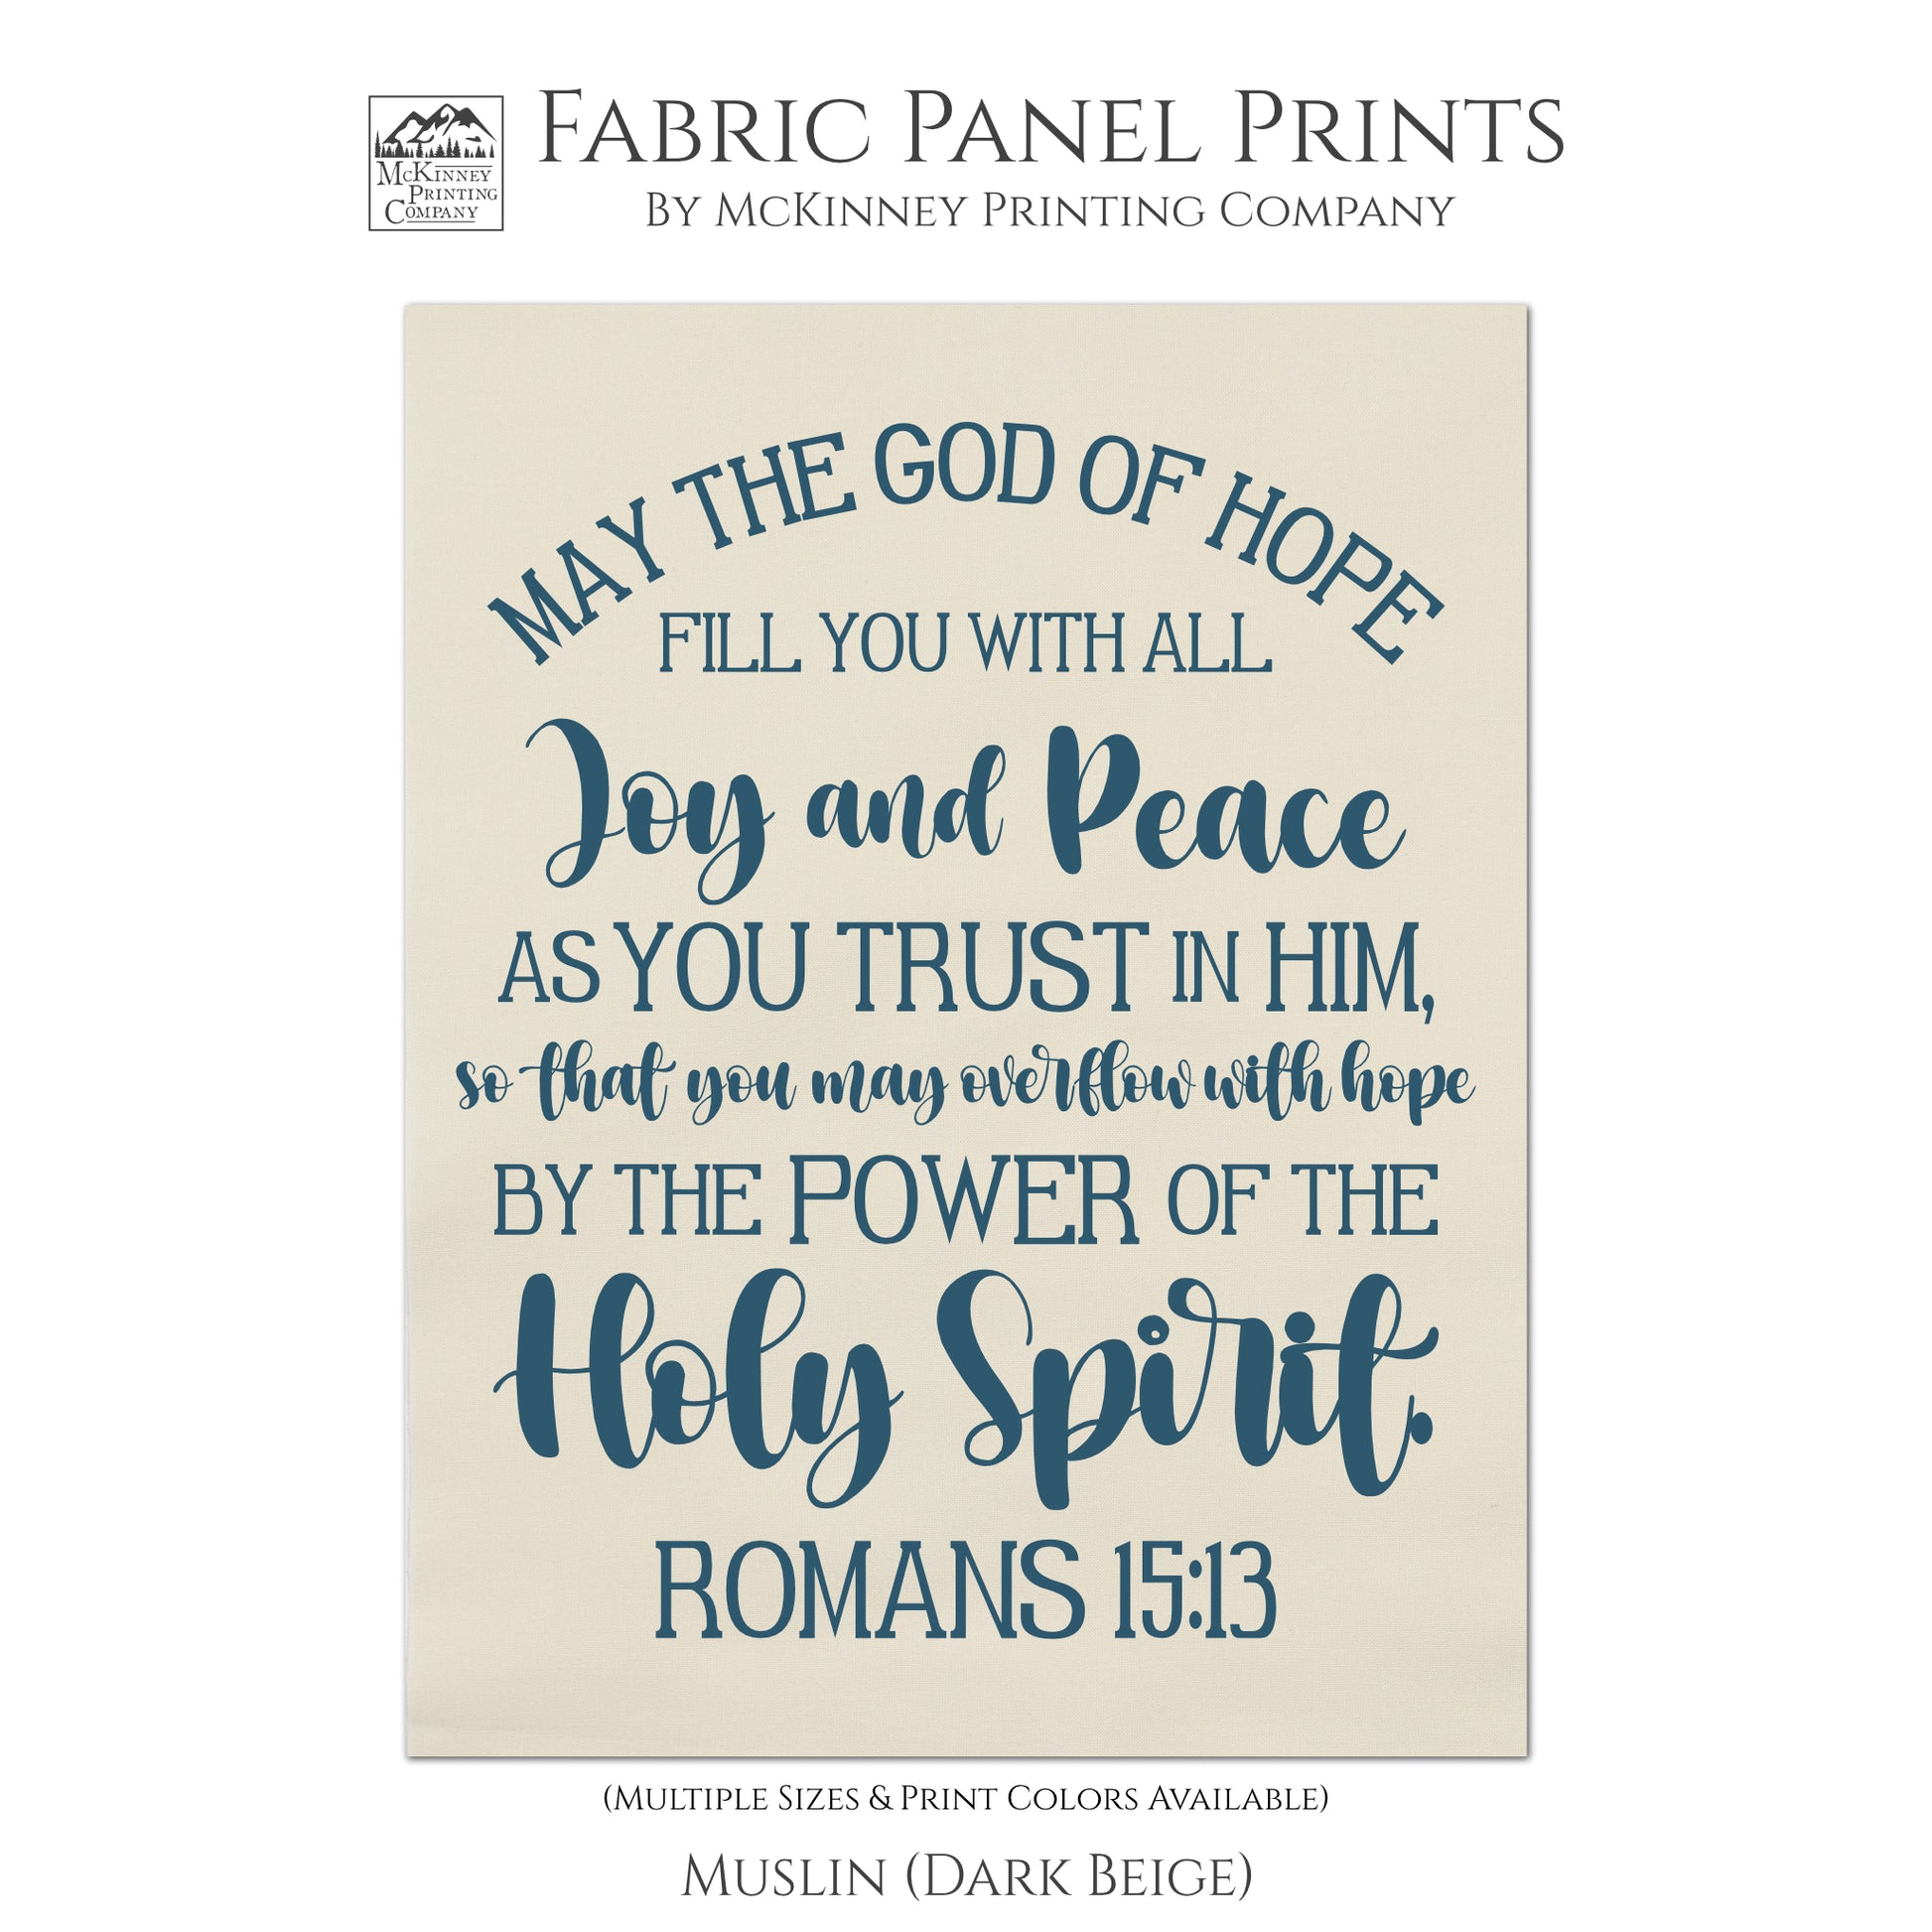 Romans 5:13 - May the God of hope fill you with all joy and peace as you trust in Him, so that you may overflow with hope by the power of the Holy Spirit - Romans 15:13 - Fabric Panel Print, Quilt Block - Muslin